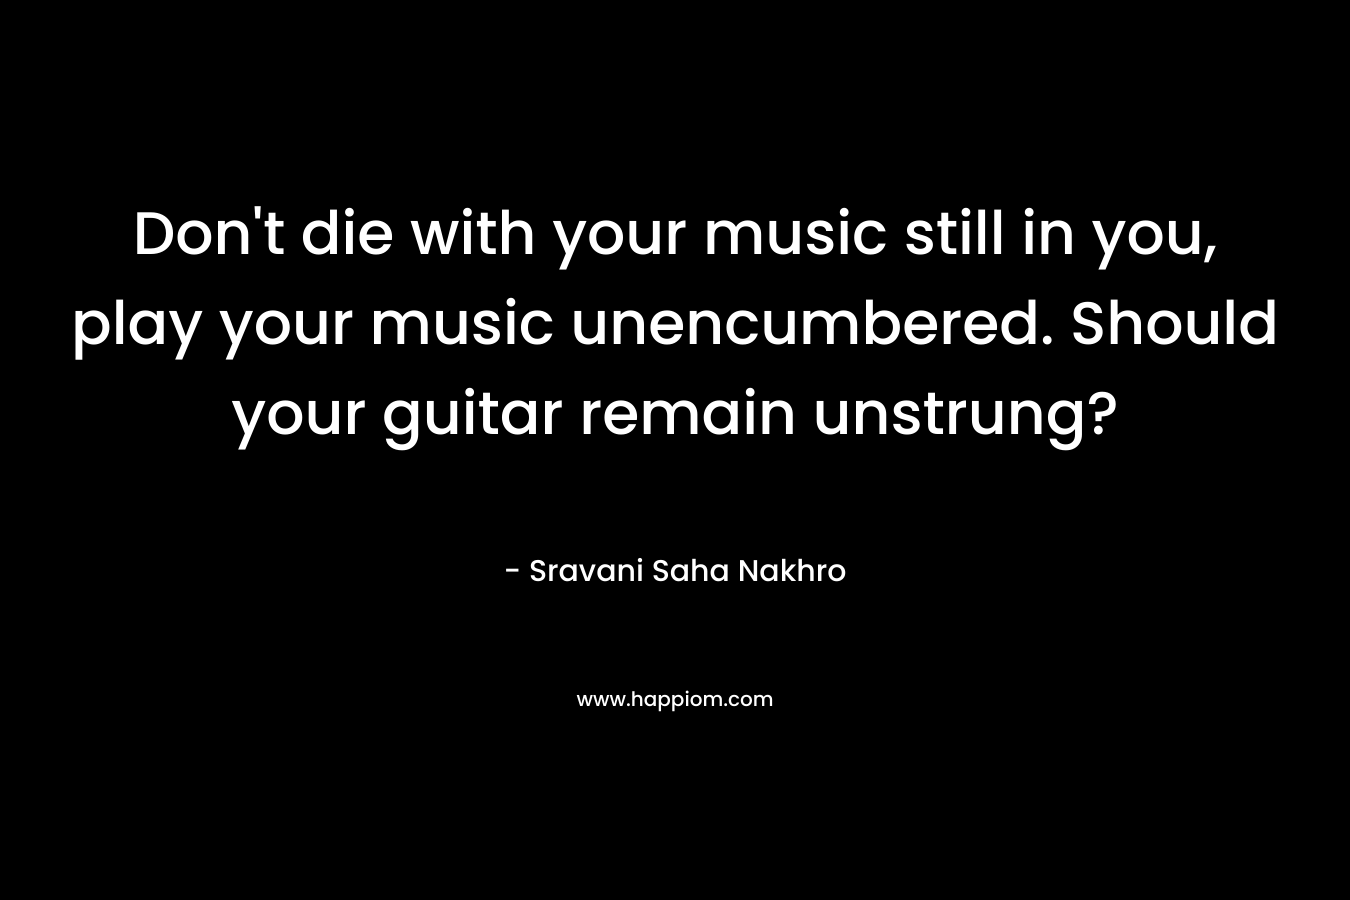 Don’t die with your music still in you, play your music unencumbered. Should your guitar remain unstrung? – Sravani Saha Nakhro